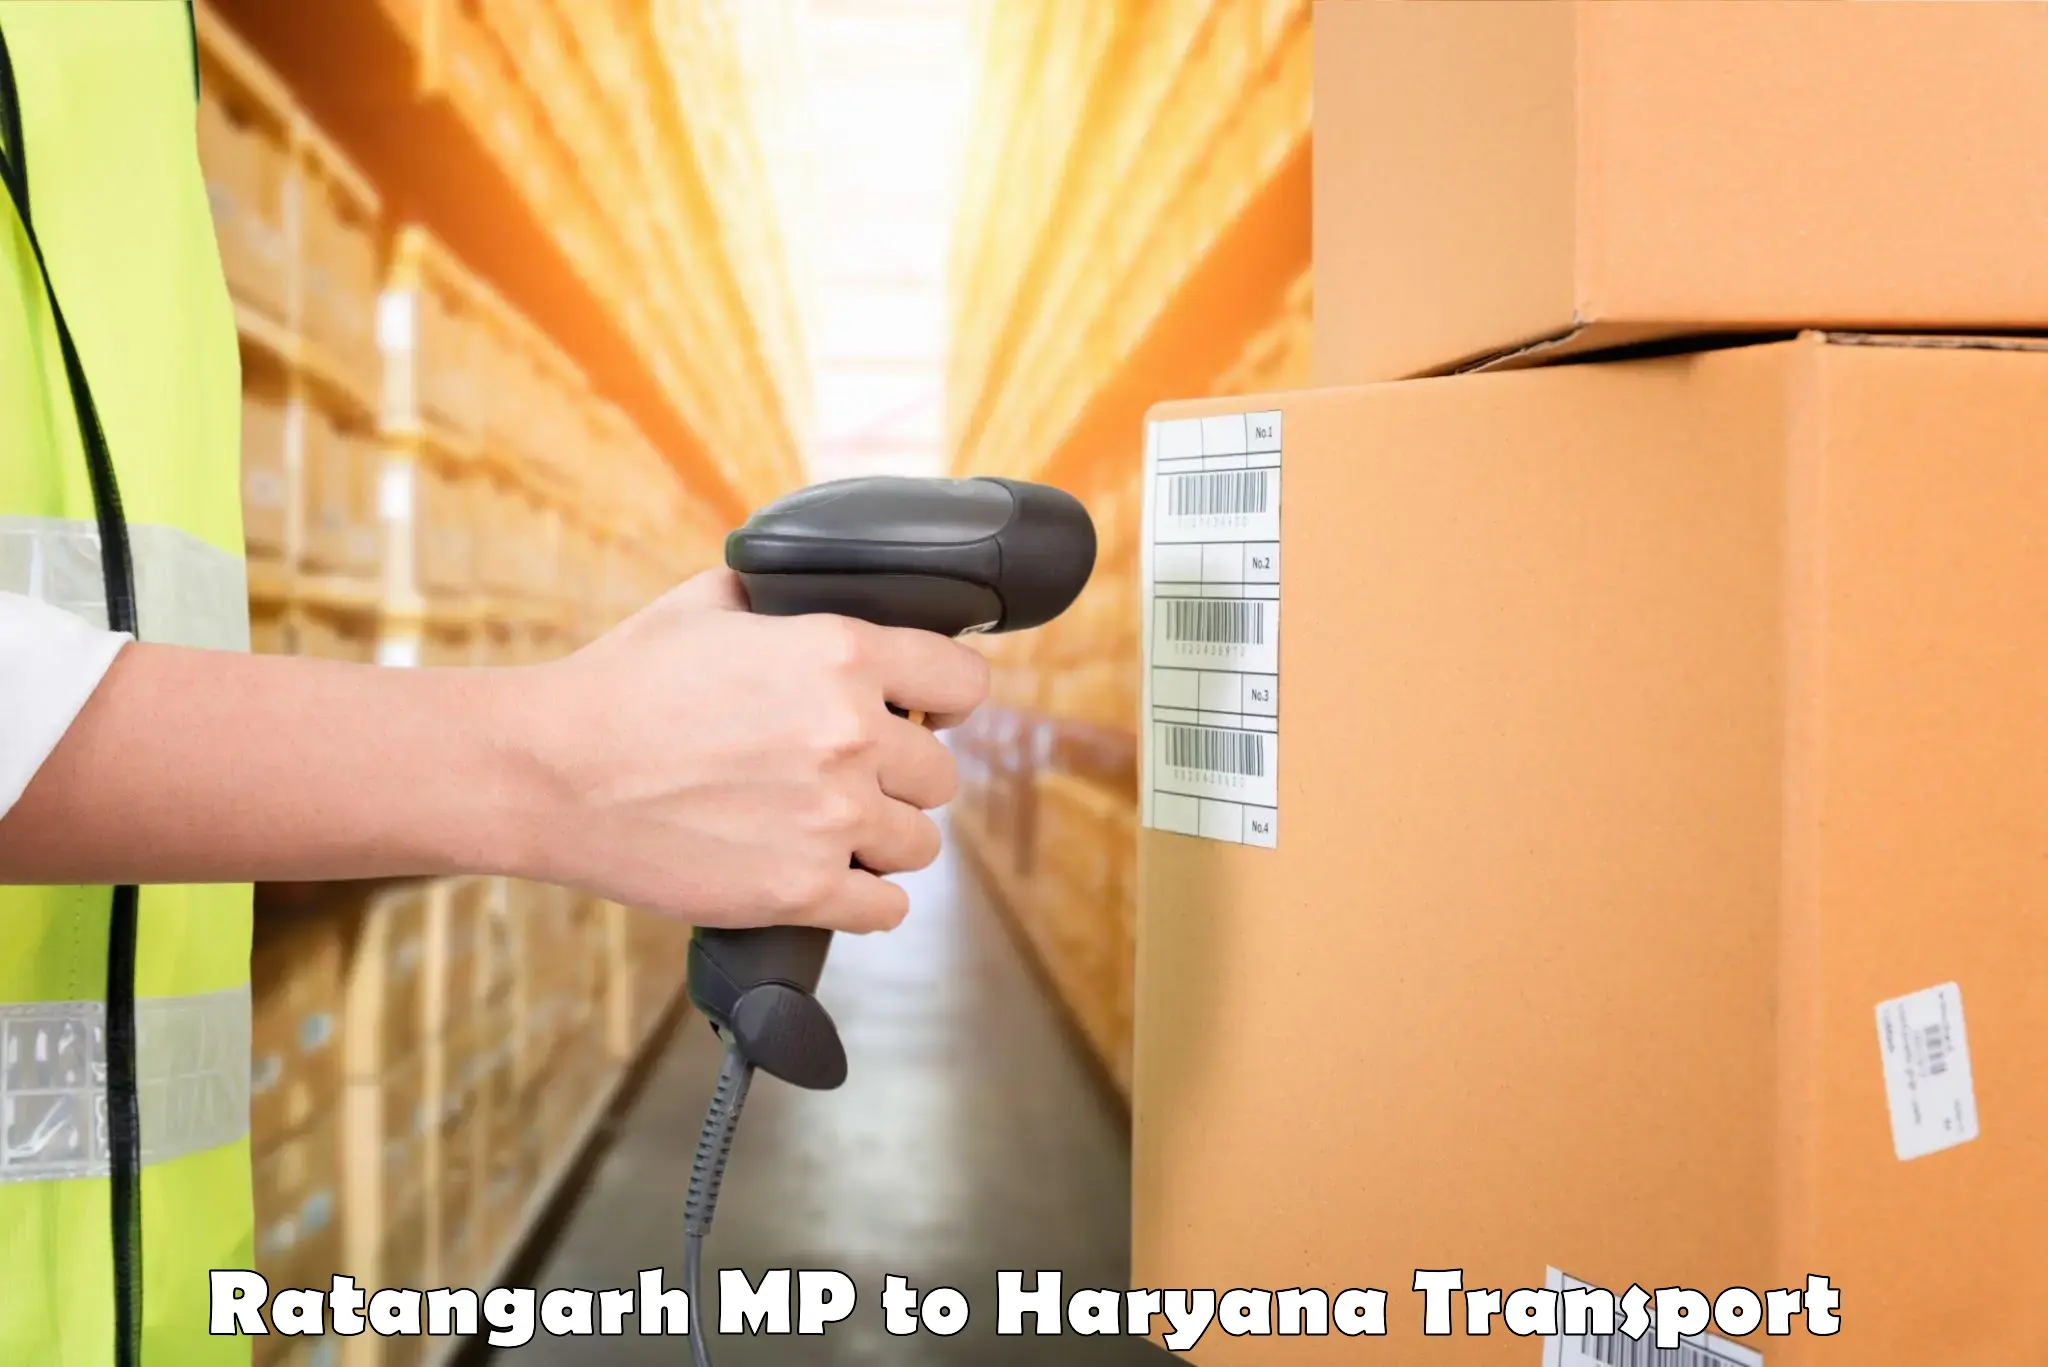 Express transport services in Ratangarh MP to Faridabad